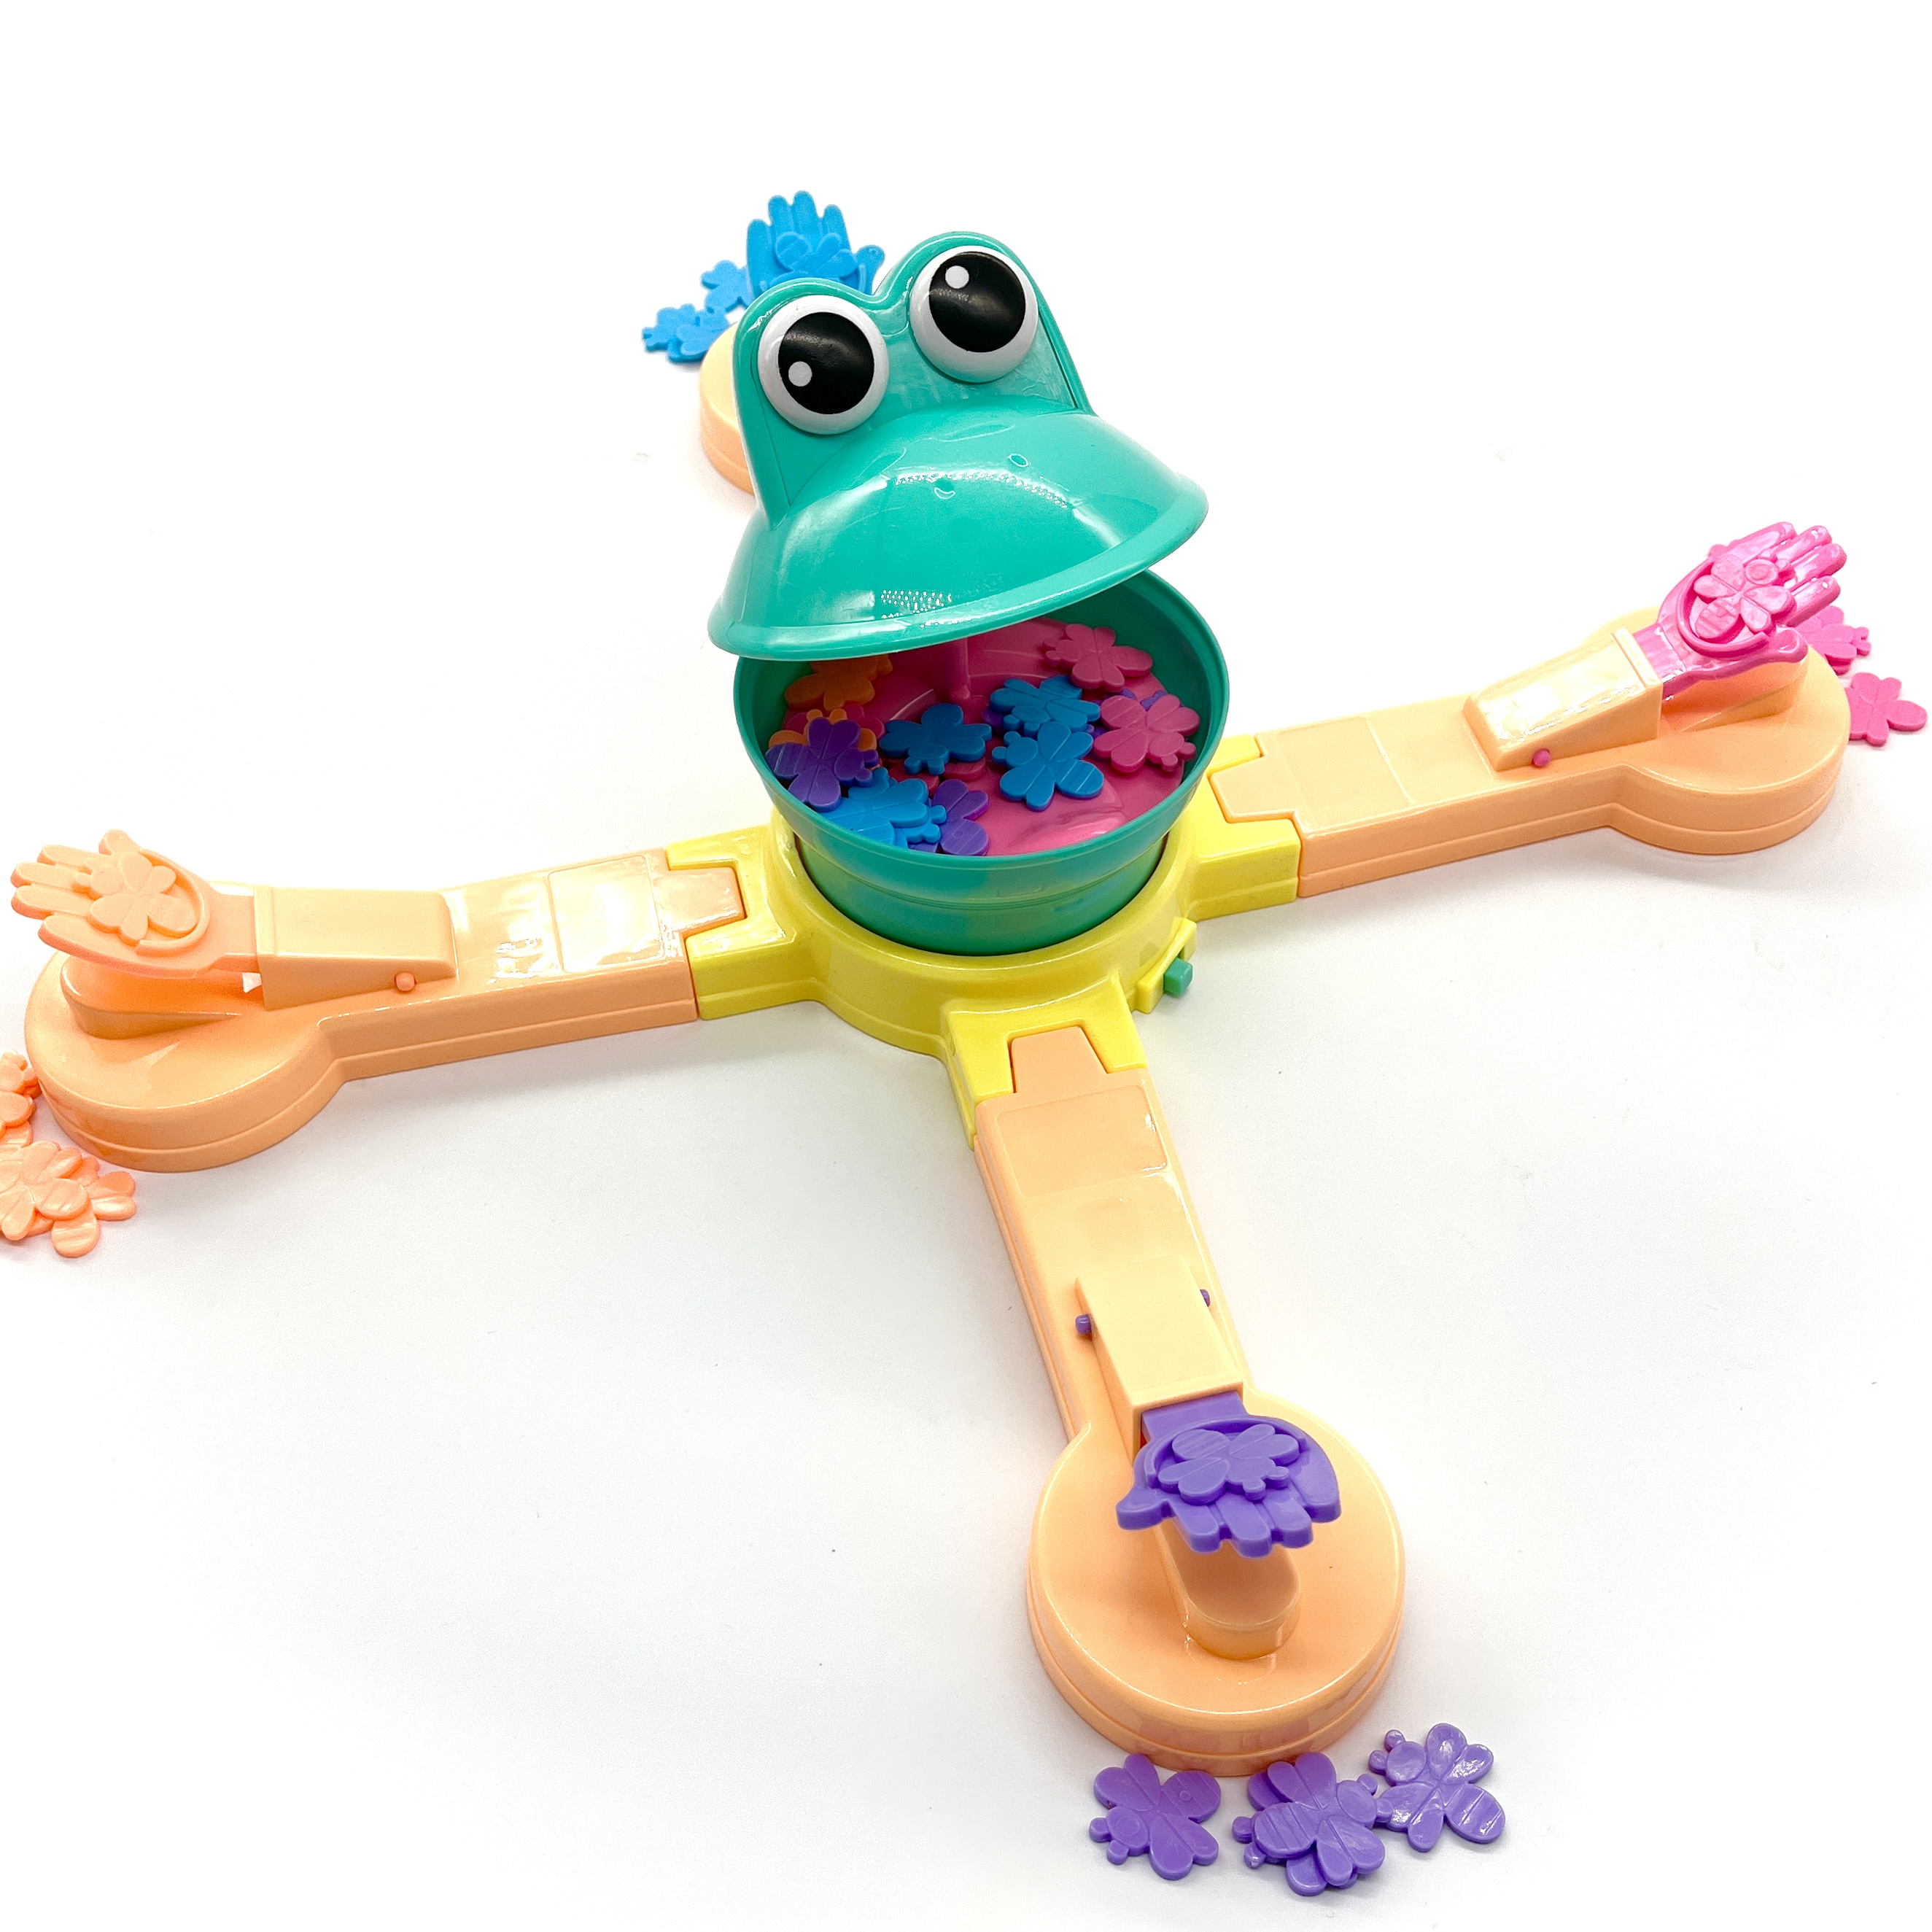 Eco-friendly Smooth Frog Simple Home Educational Toy Cartoon Gift Desktop Game Inter Action Family Kids Children Funny Feed Frog